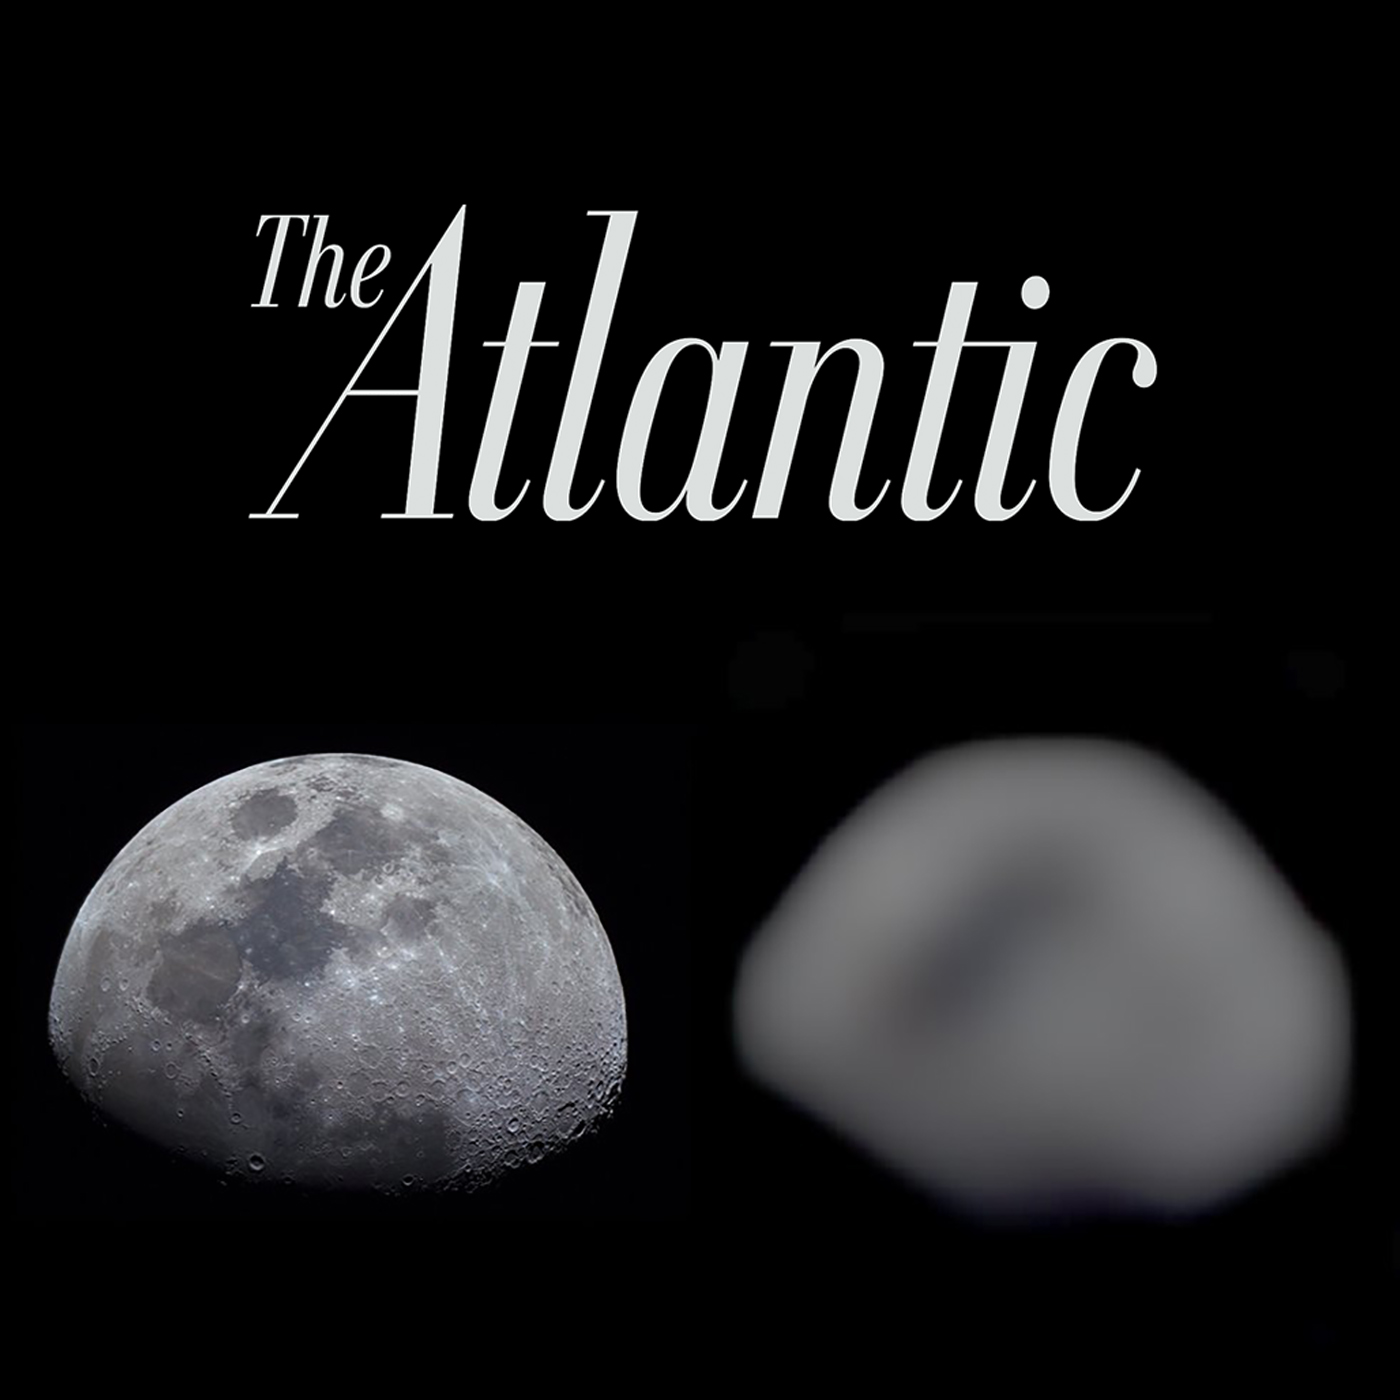 The Atlantic, jumping spiders can see the moon